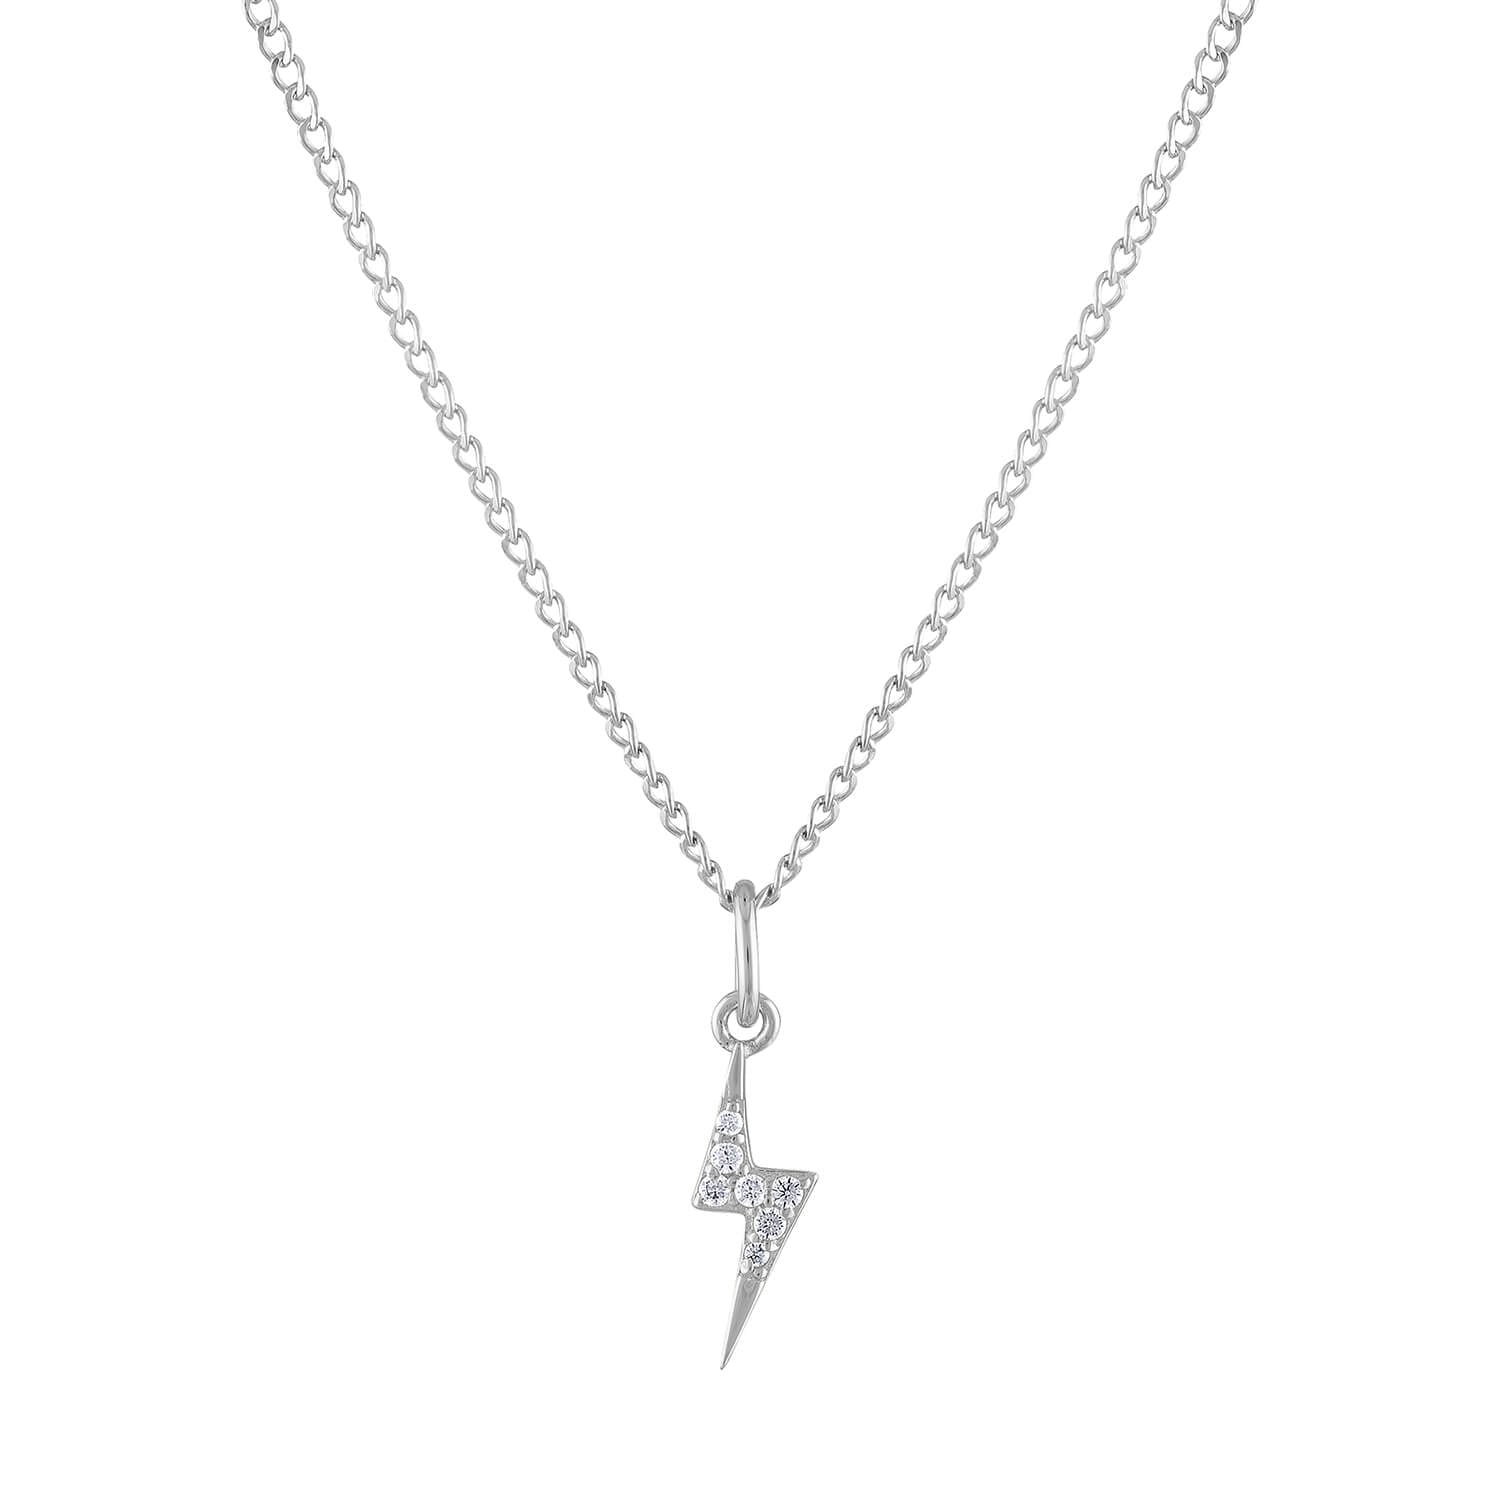 Mini Pave Lightning Charm Necklace in Sterling Silver